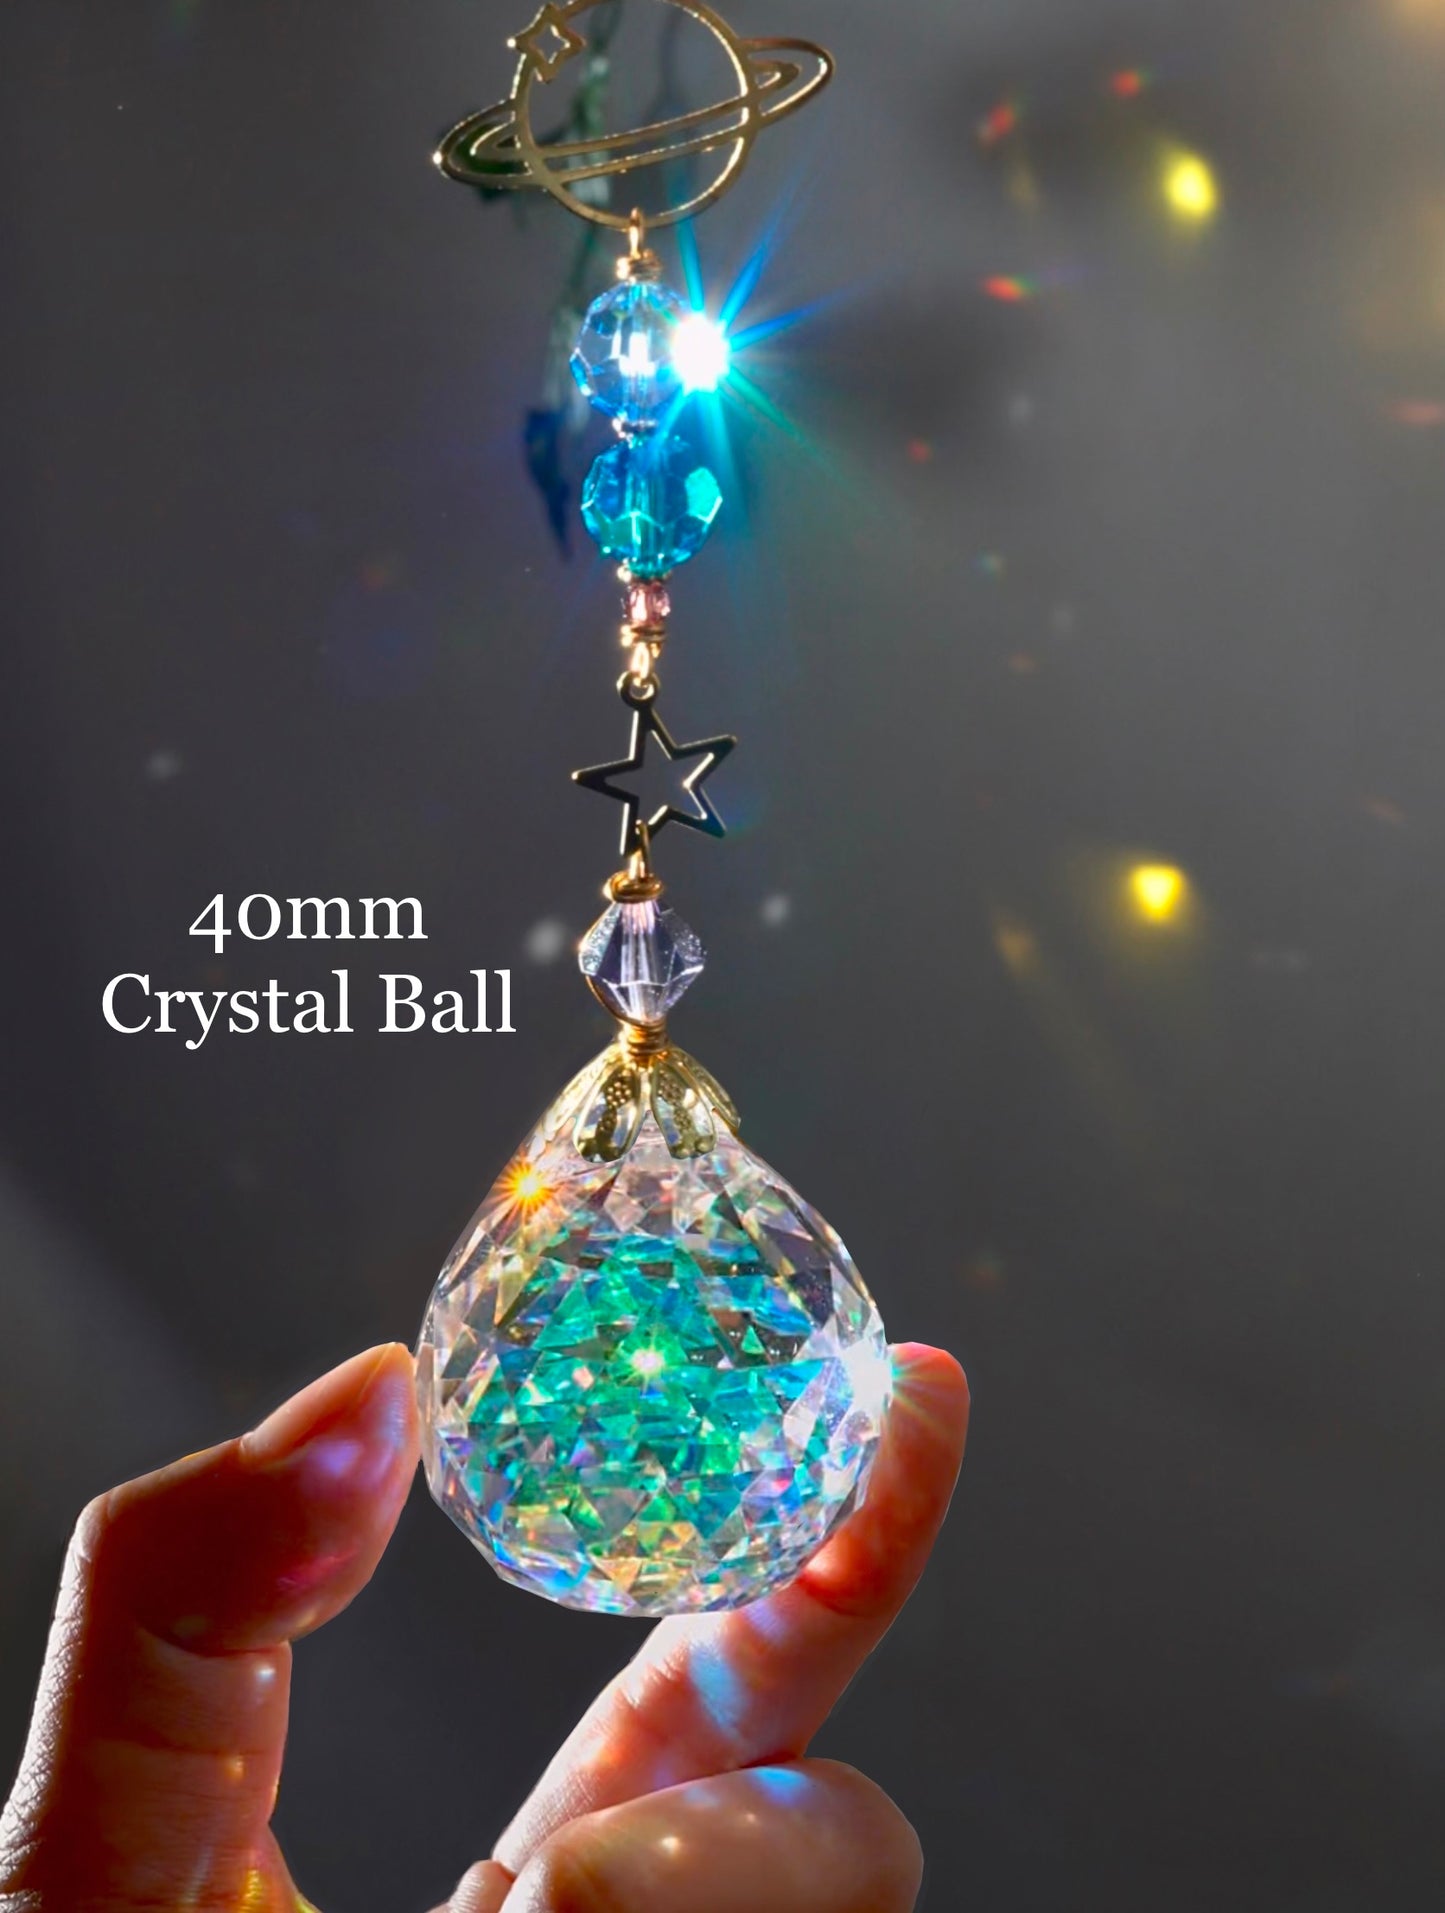 Solar System Crystal Ball Suncatcher Window Charm, celestial planetary hanger made with prisms and Brass